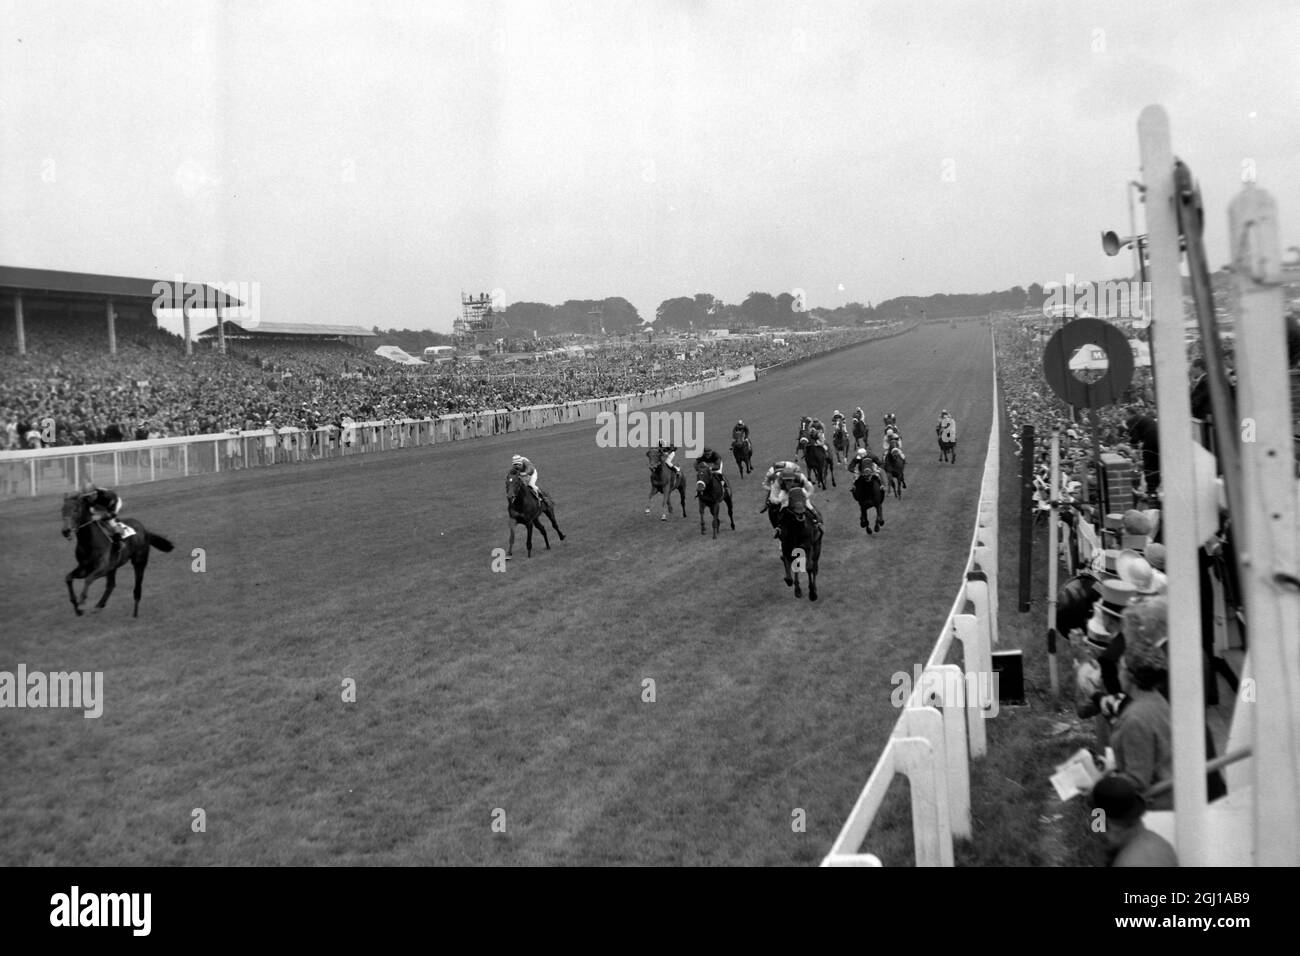 HORSE RACING IN EPSOM DERBY SANTA CLAUS BREASLEY RACE HOME TO WIN ; 3 JUNE 1964 Stock Photo